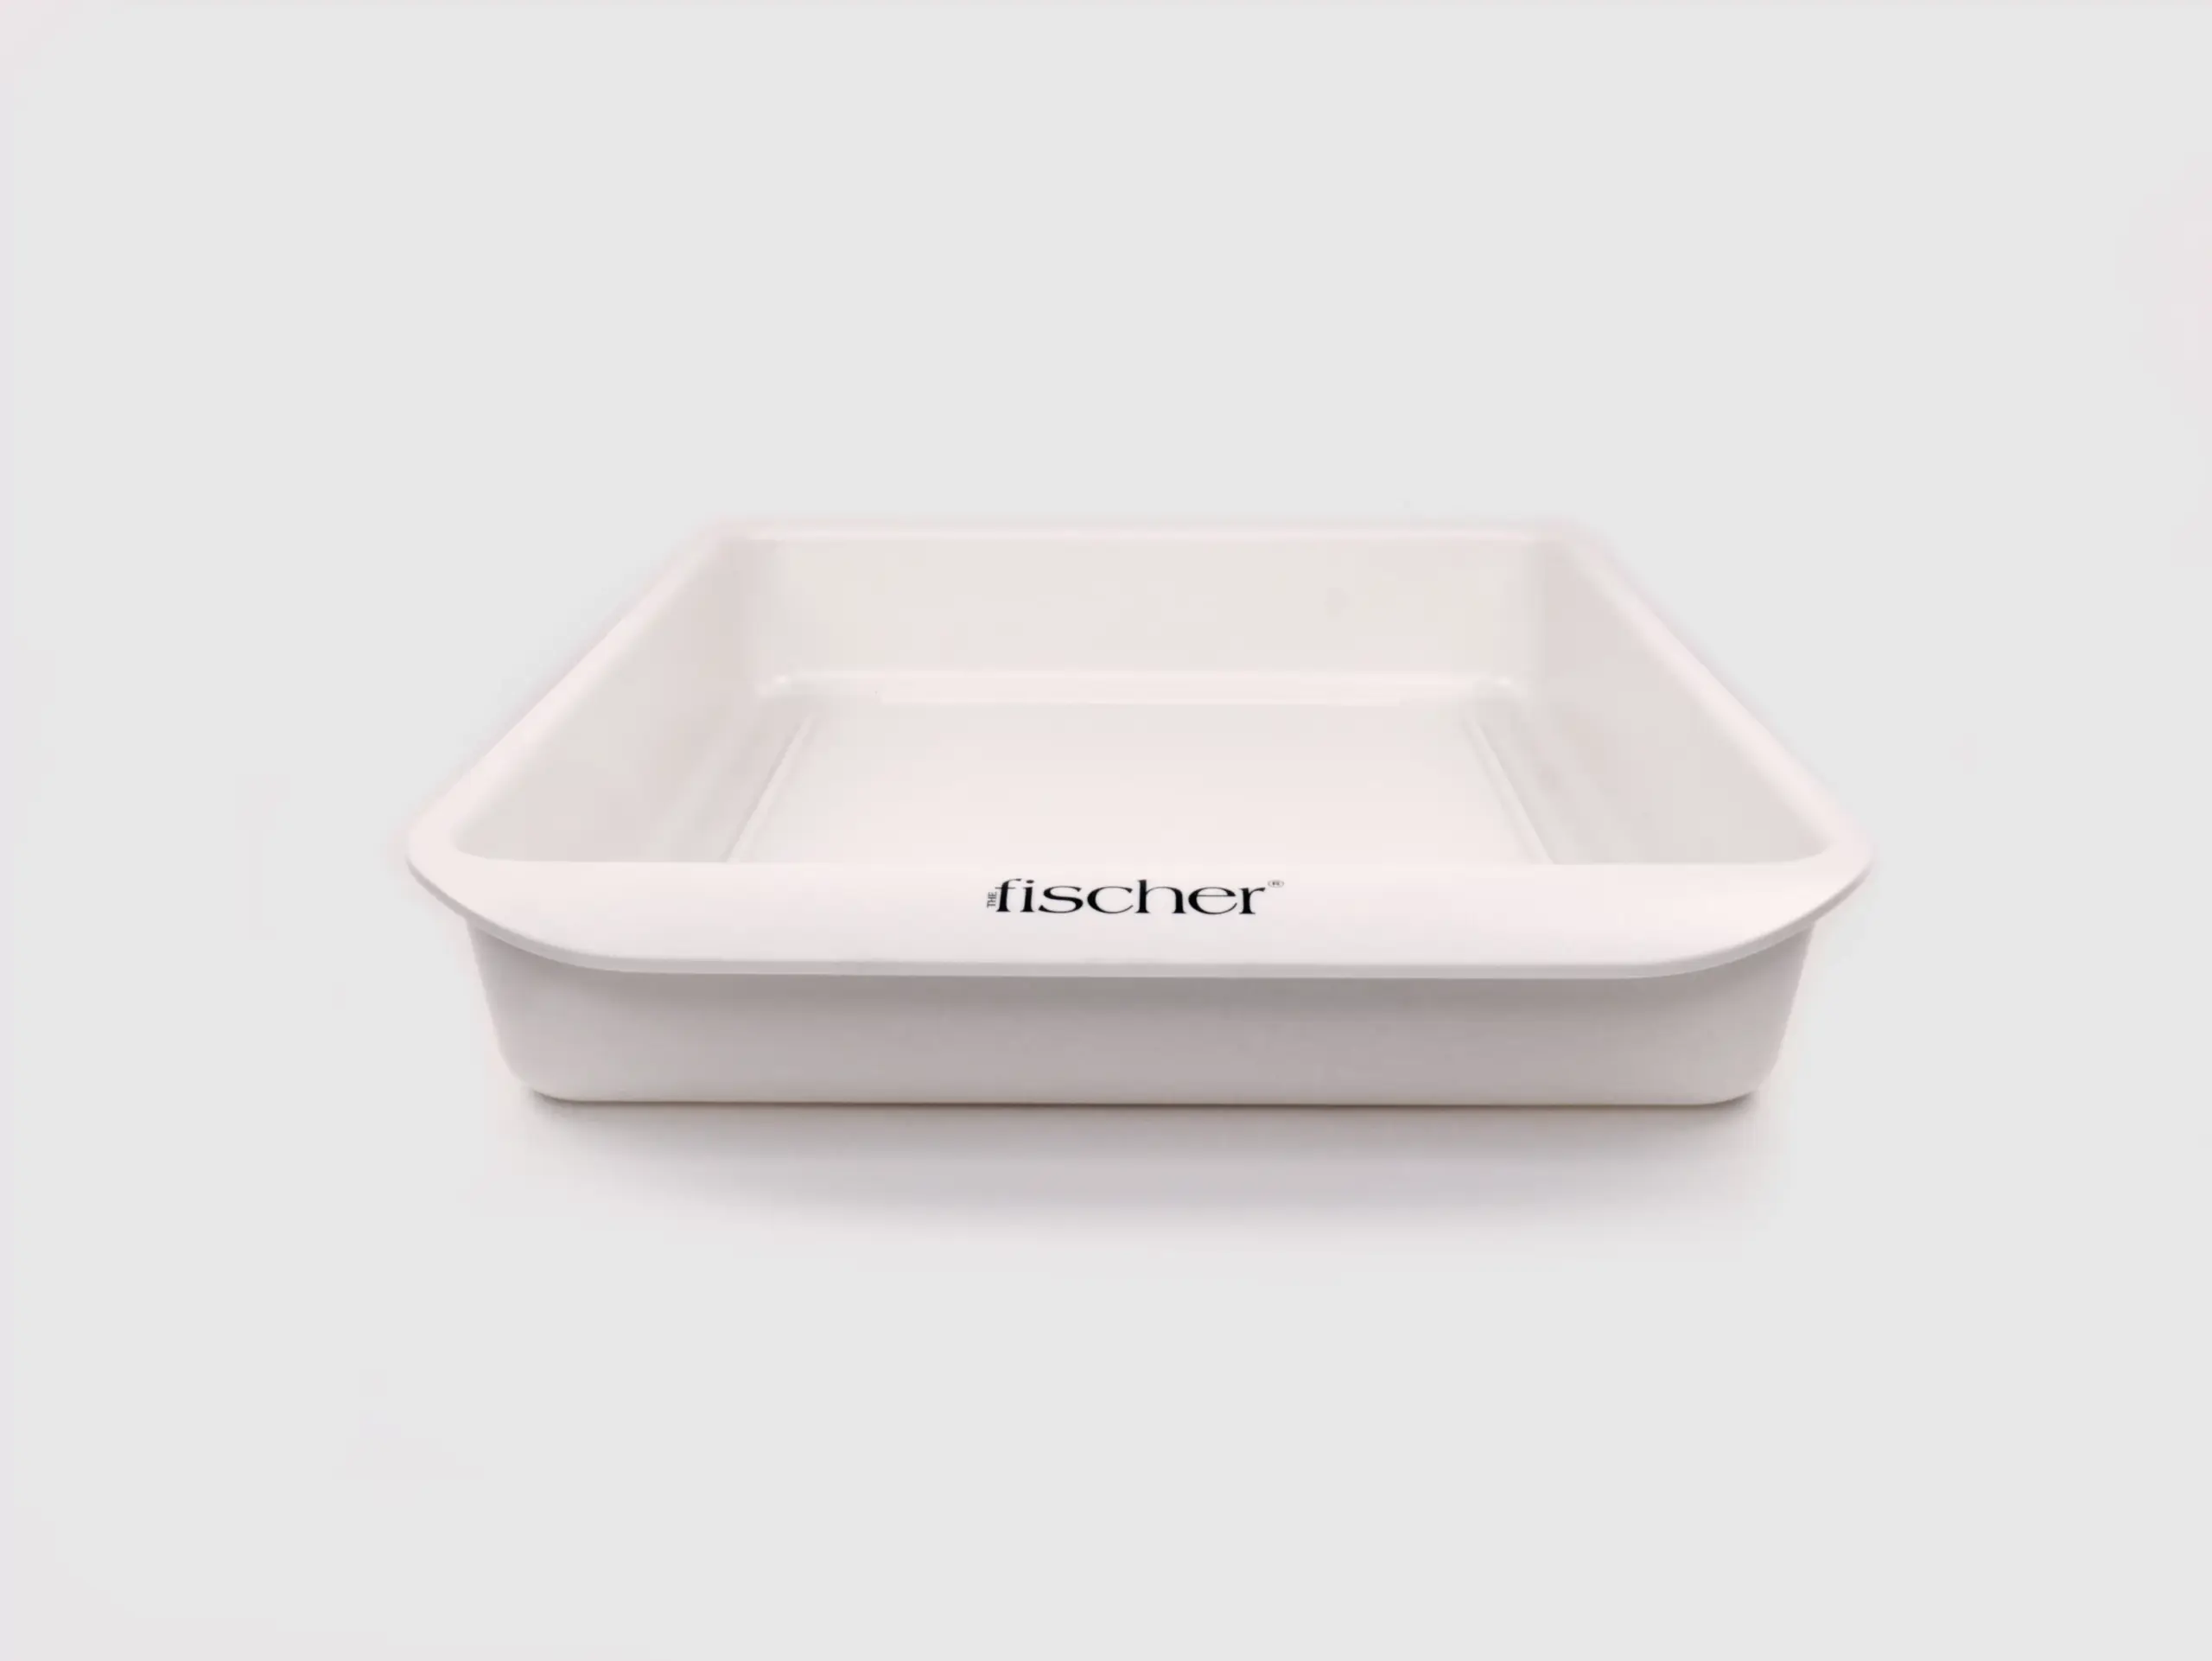 Photograph featuring one of the white water bath trays utilized in conjunction with RA Fischer's 'The Fischer' Device—an iontophoresis device crafted specifically for the treatment of hyperhidrosis (excessive sweating). The image is set against a plain white background.